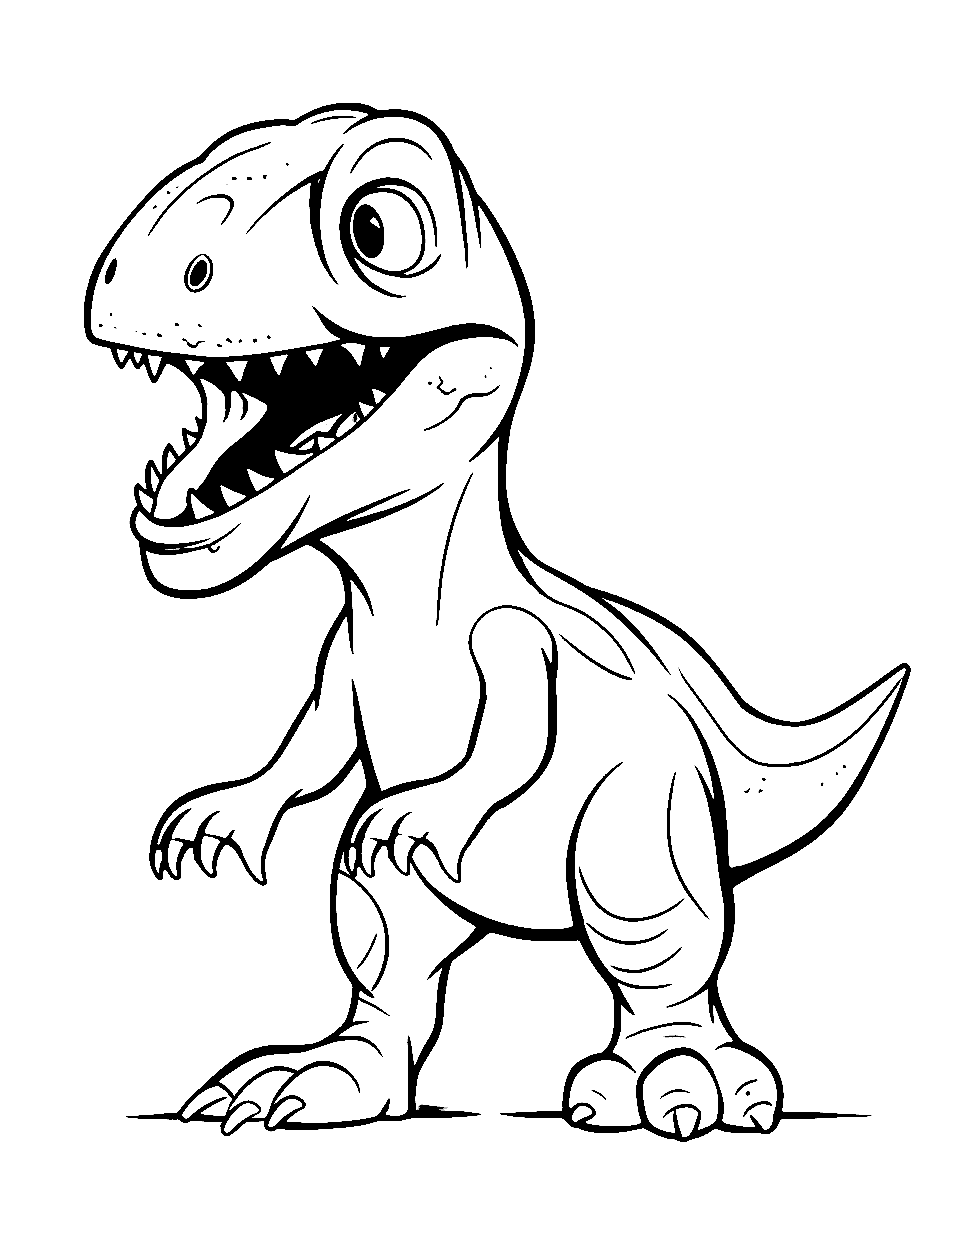 Cute T Rex T-rex Coloring Page - A chibi-style T-Rex with big eyes and a tiny tail.